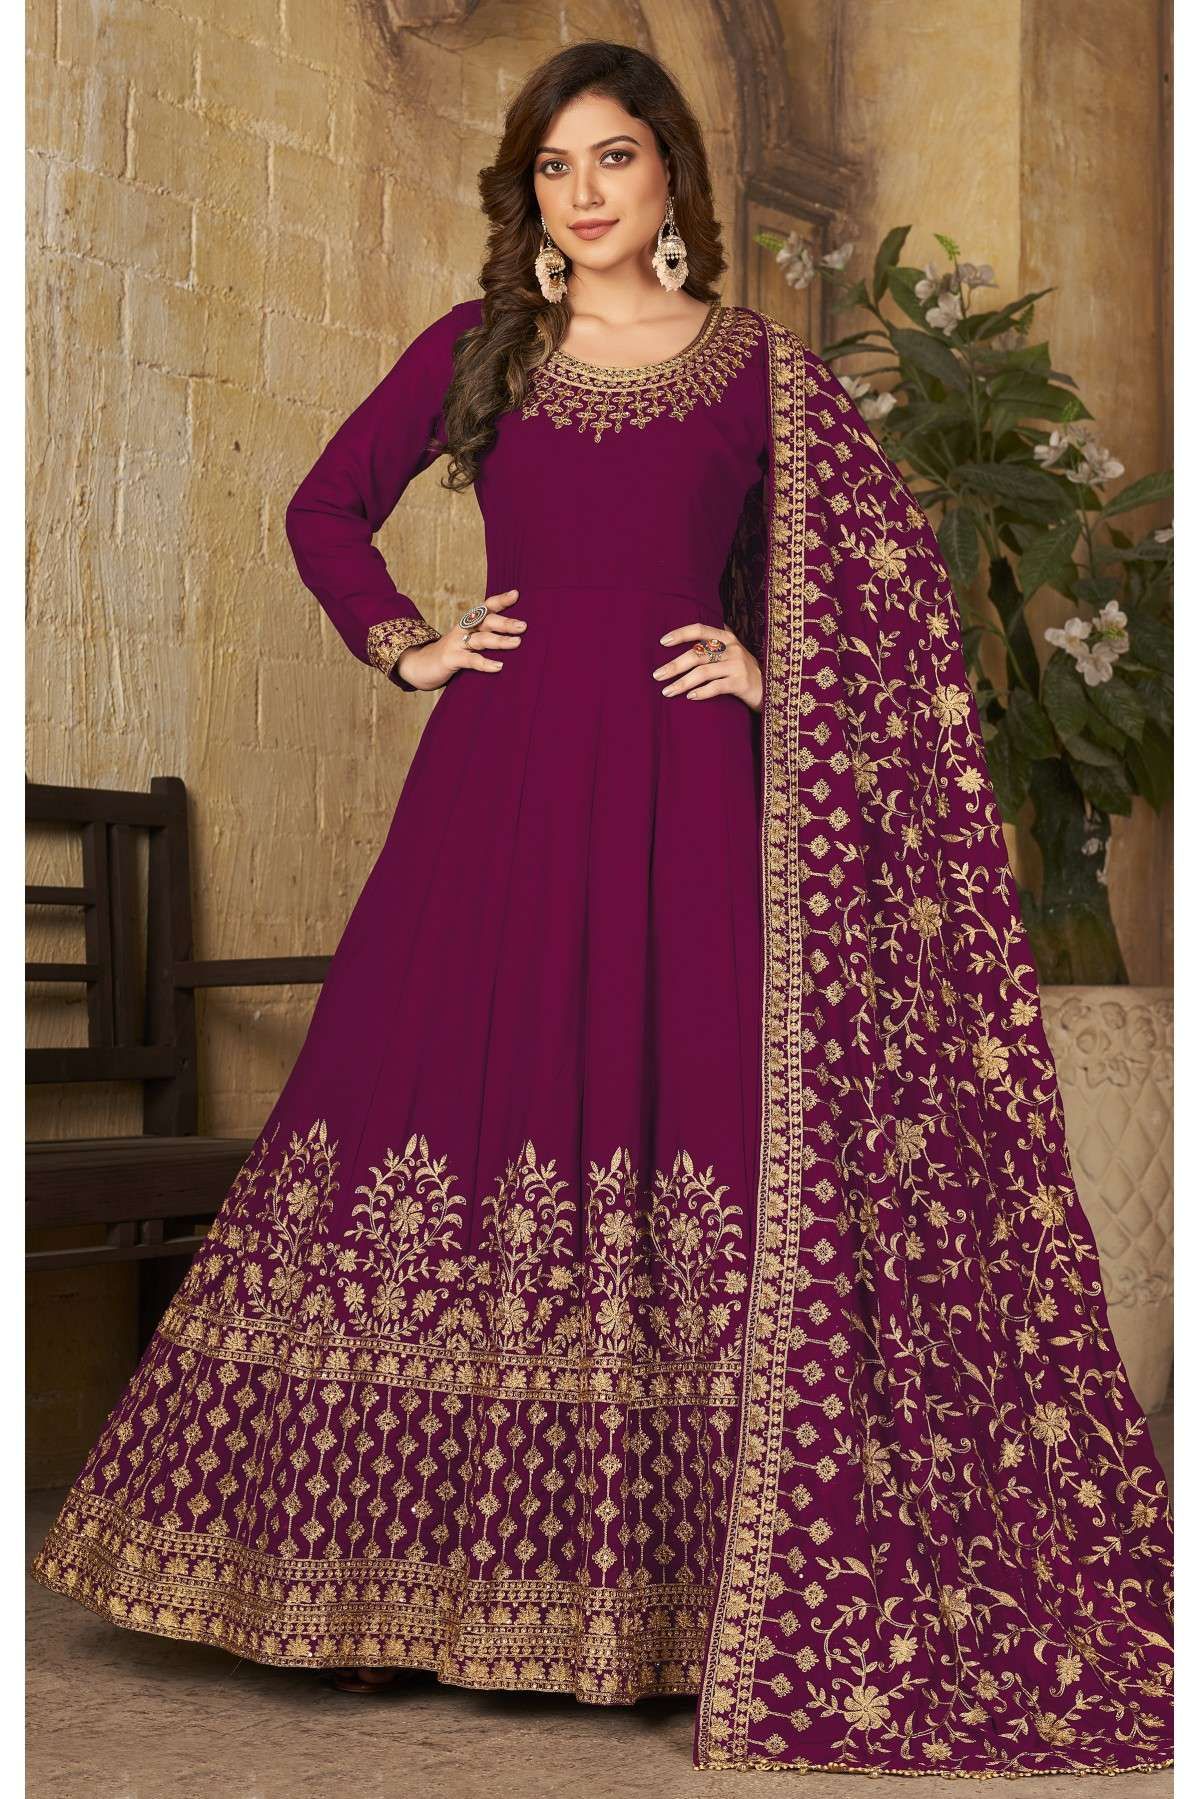 Faux Georgette Embroidery Anarkali Suit In Magenta Pink Colour - SM1640802